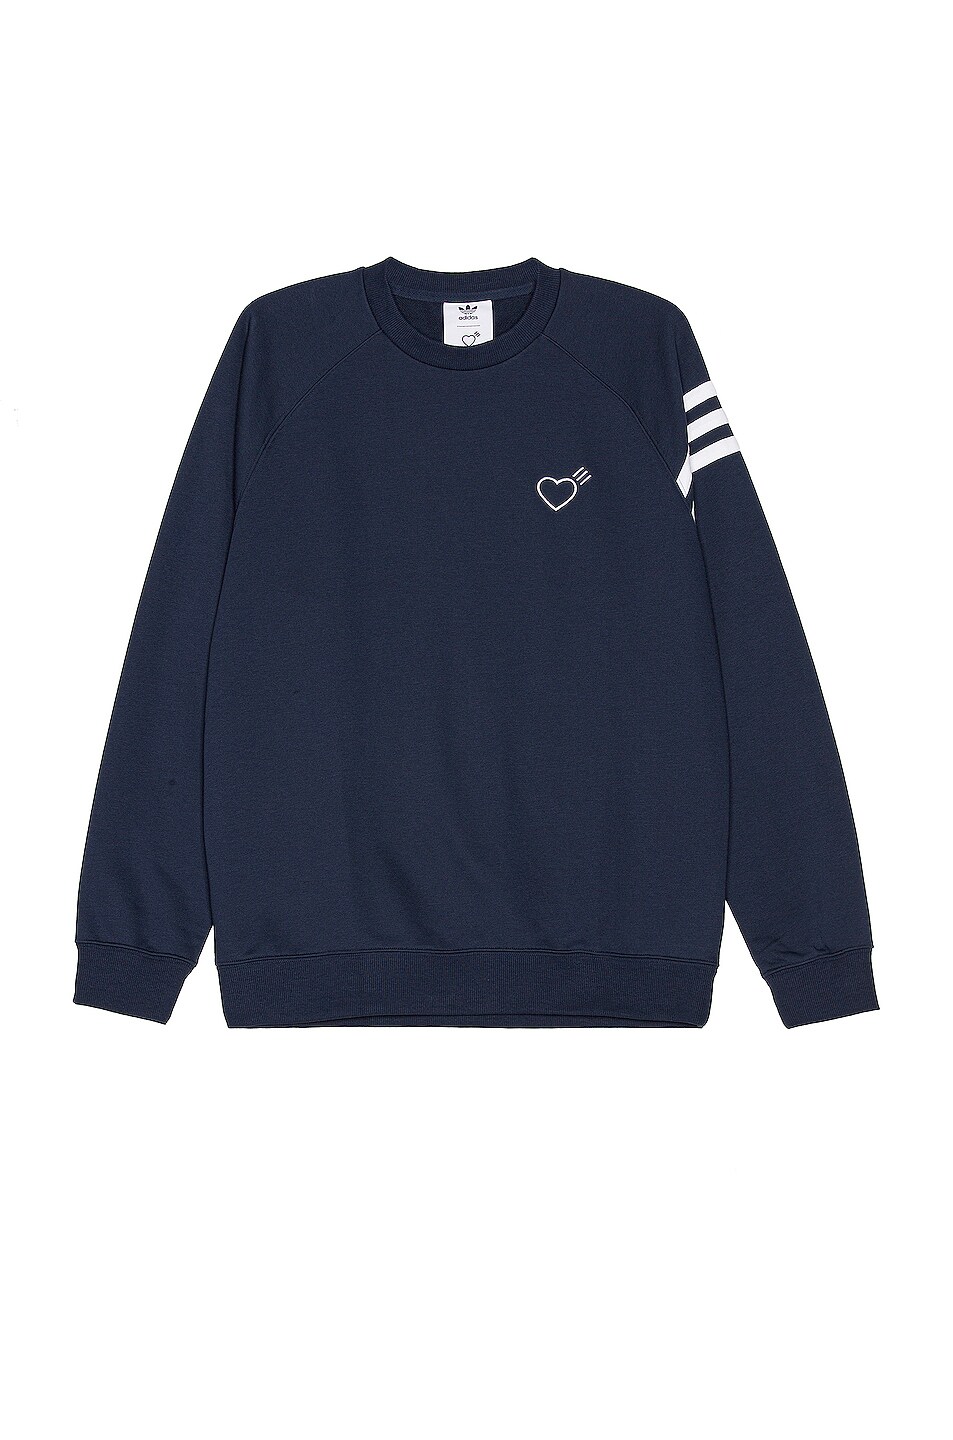 Image 1 of adidas x HUMAN MADE Sweater in Collegiate Navy